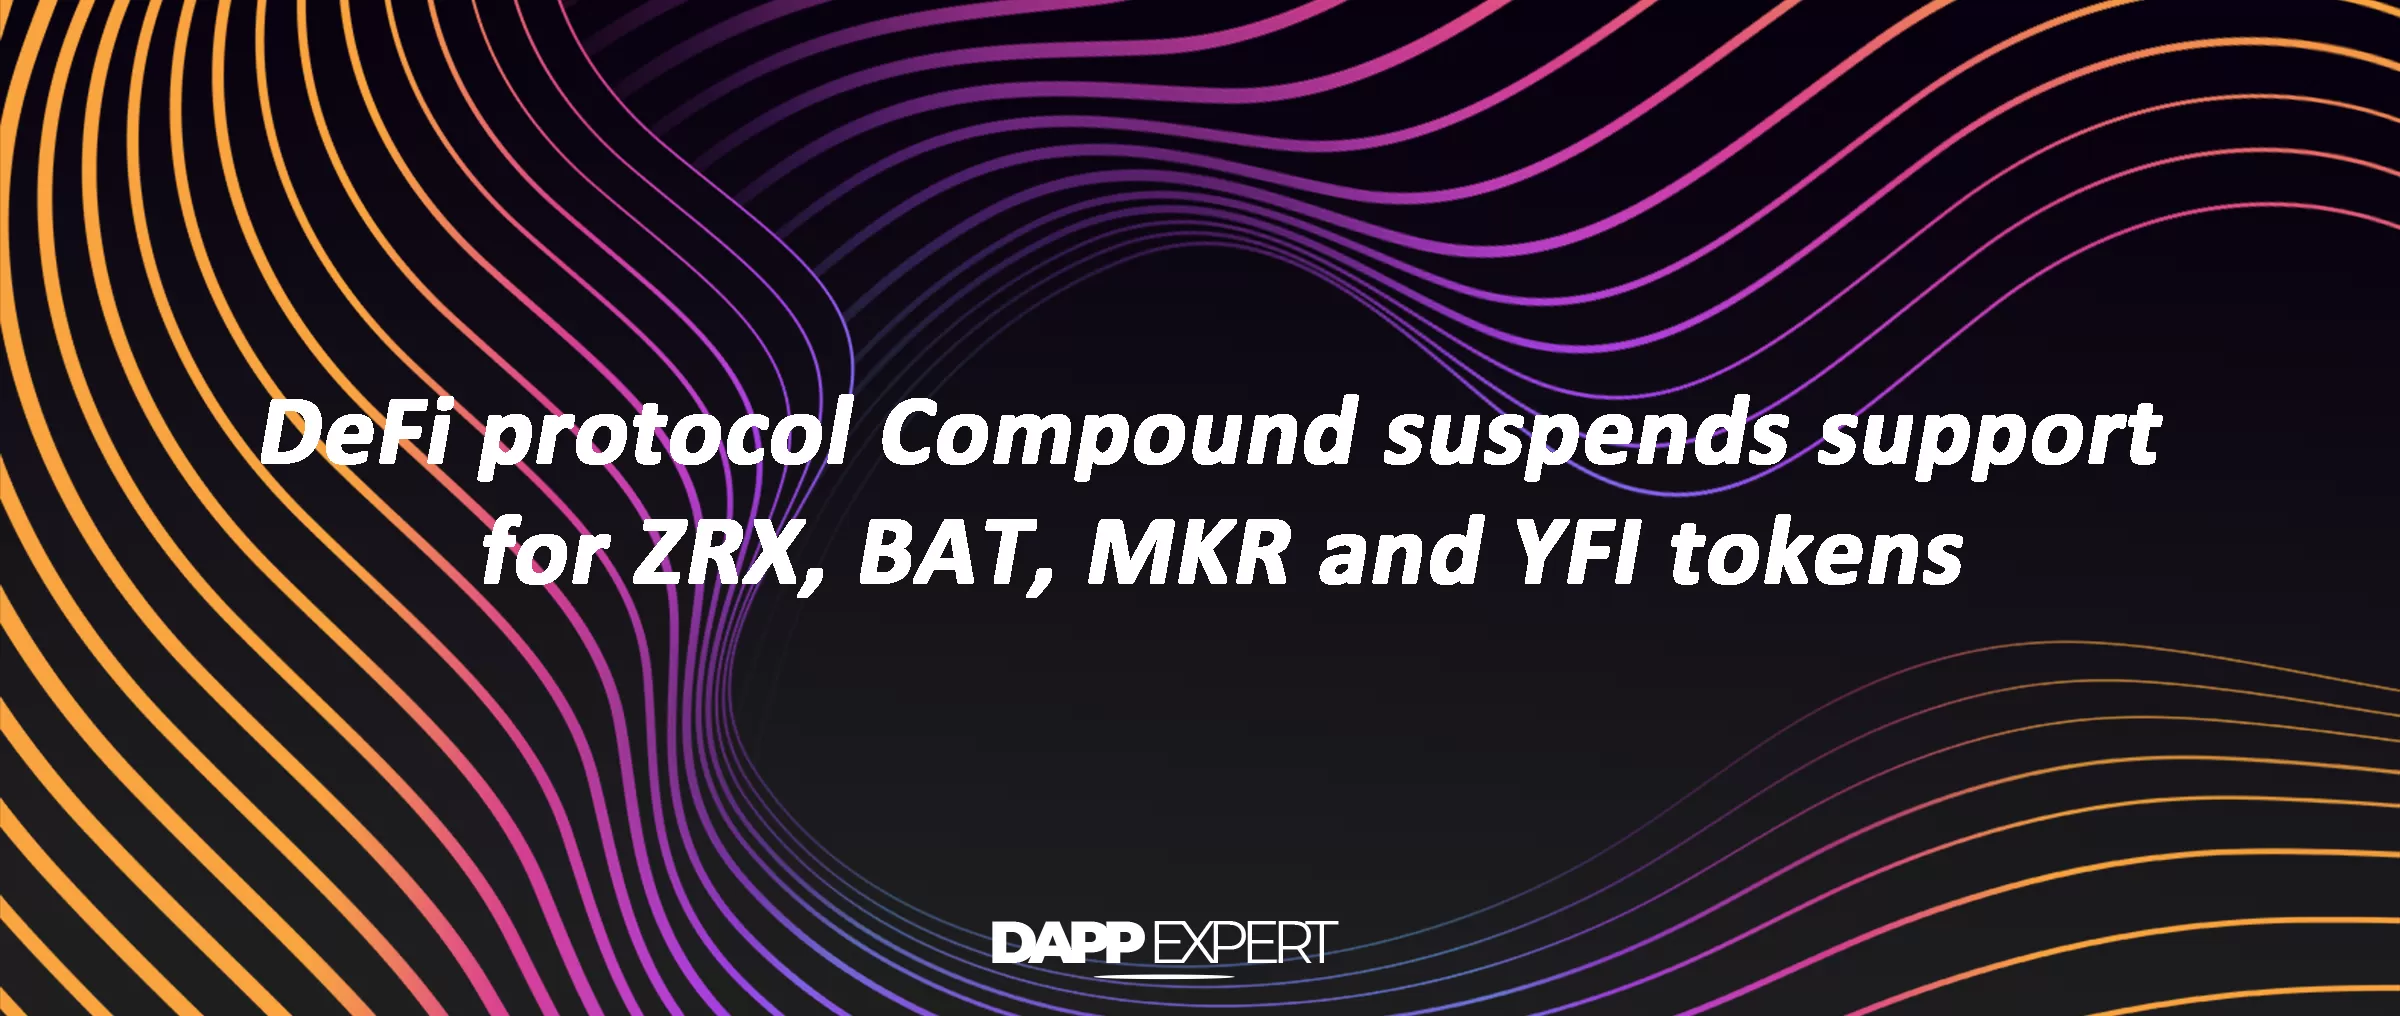 DeFi protocol Compound suspends support for ZRX, BAT, MKR and YFI tokens